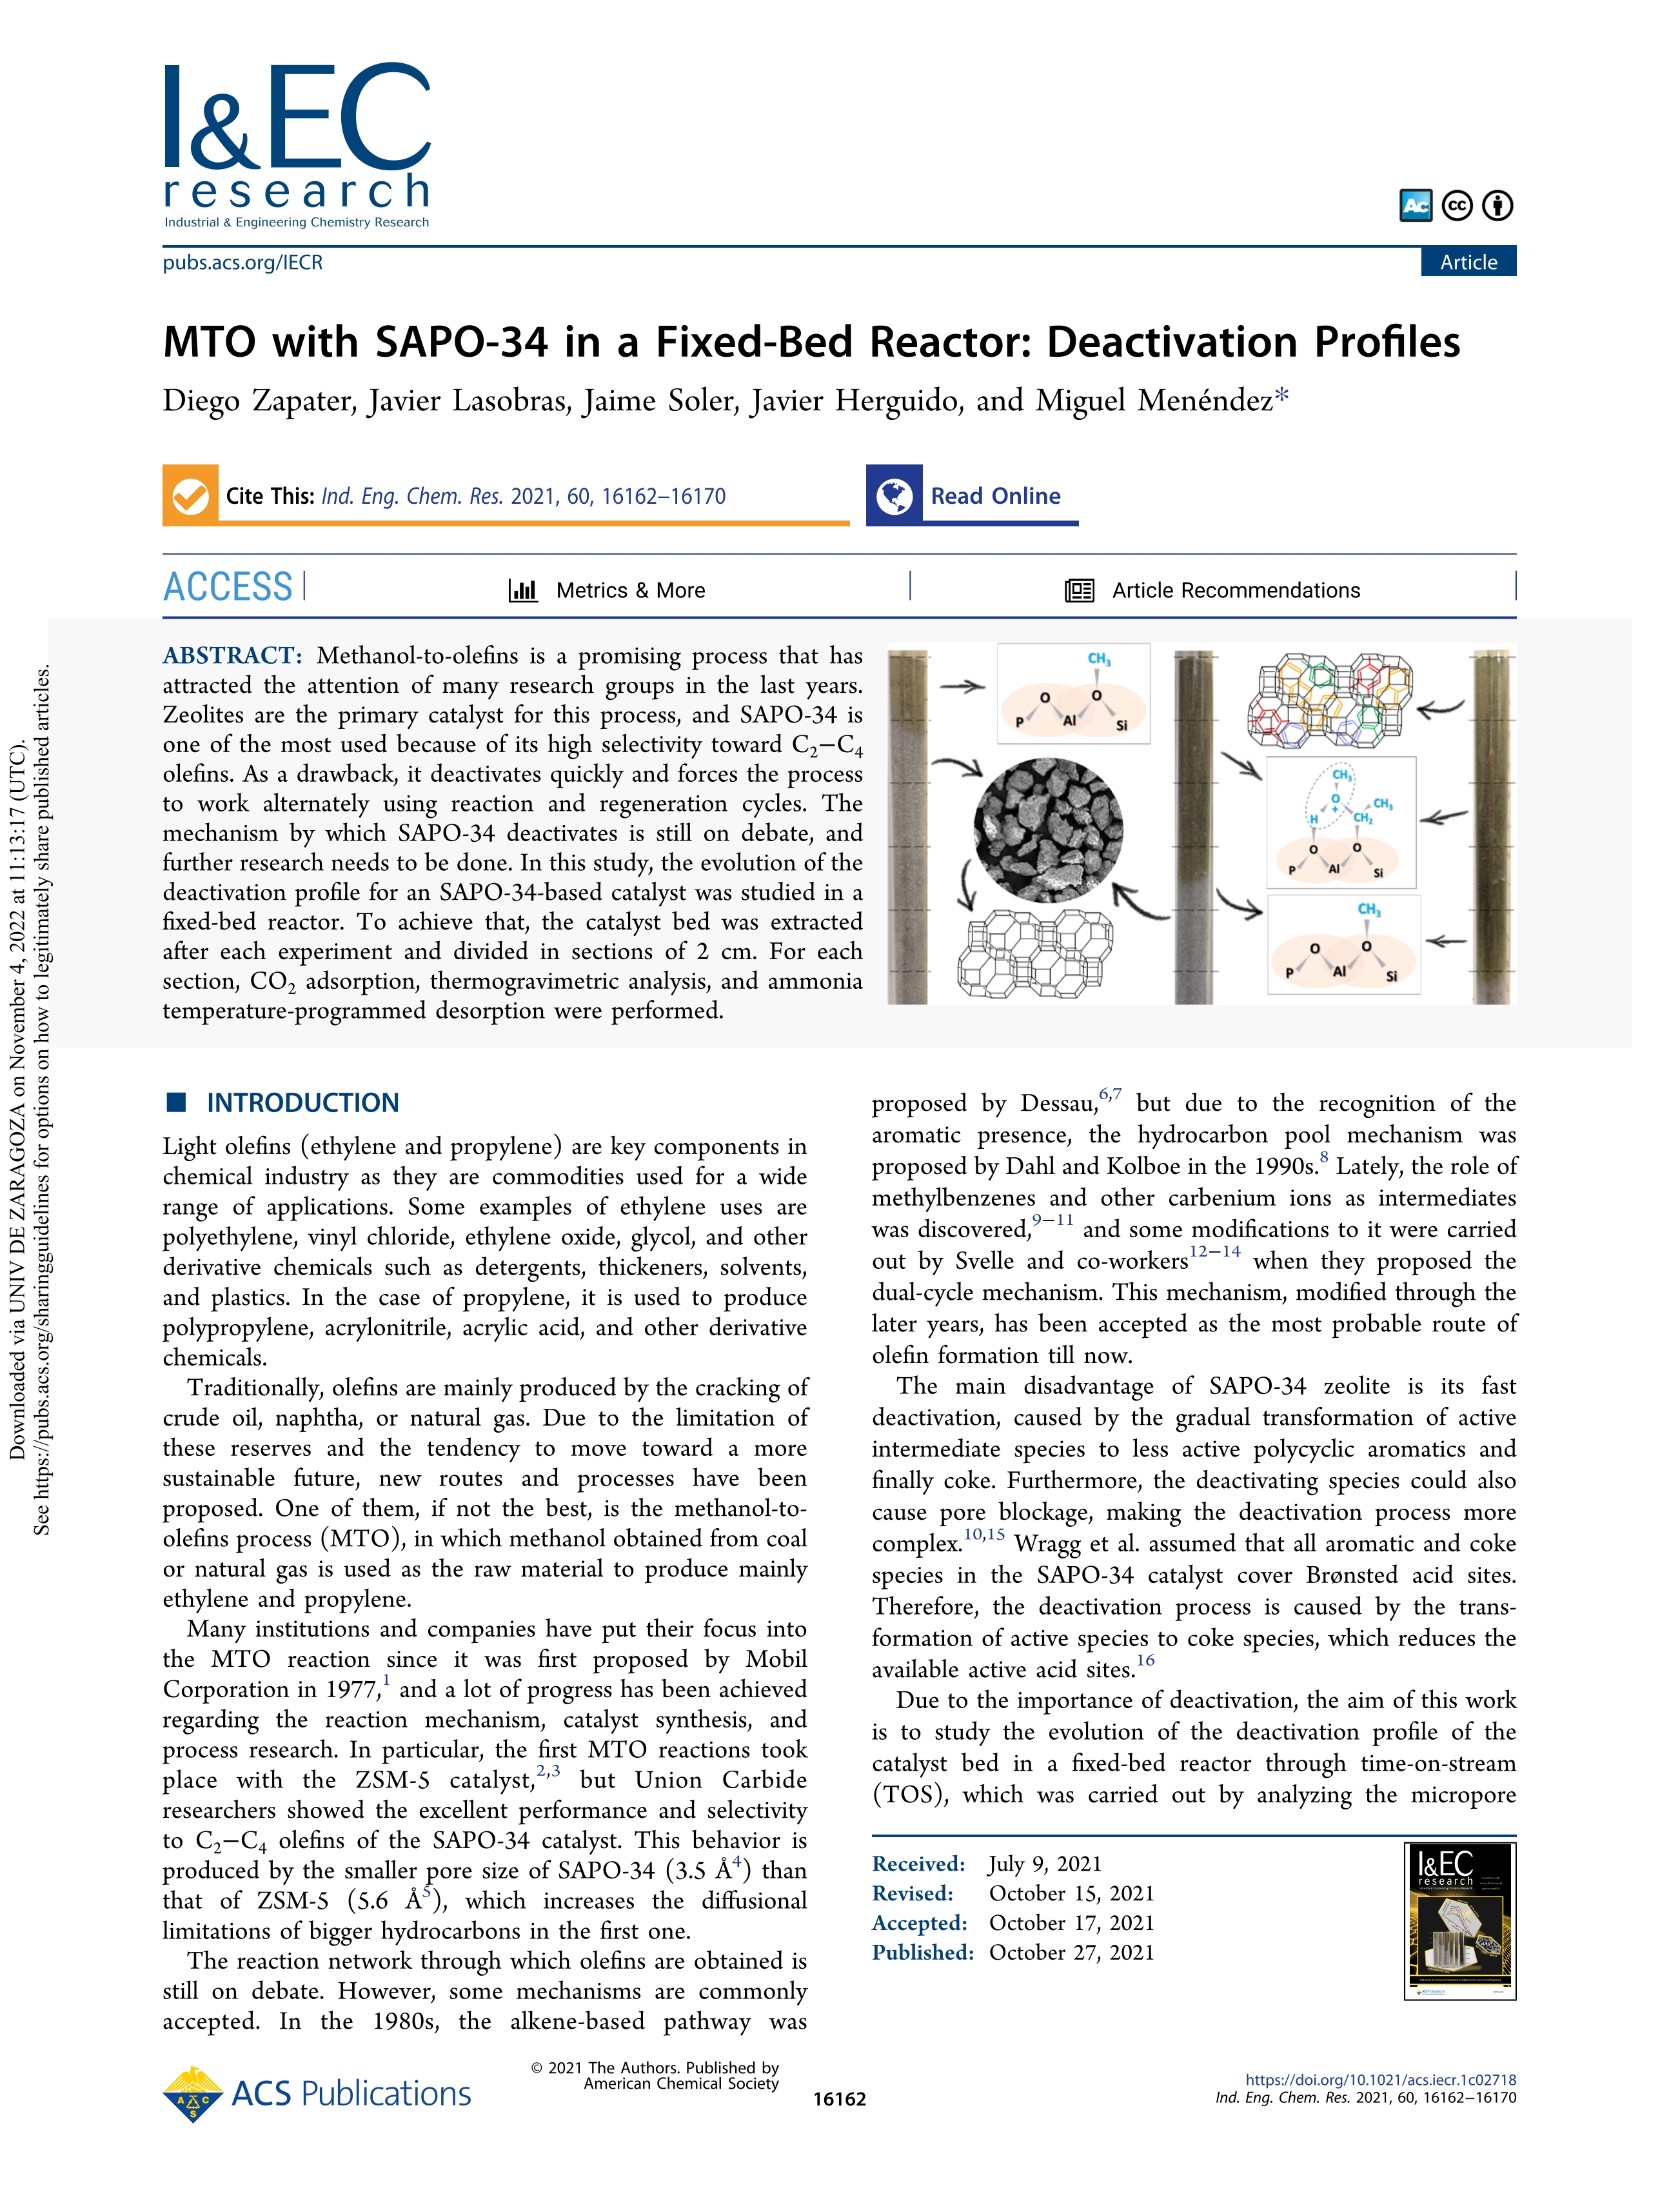 MTO with SAPO-34 in a Fixed-Bed reactor: deactivation profiles